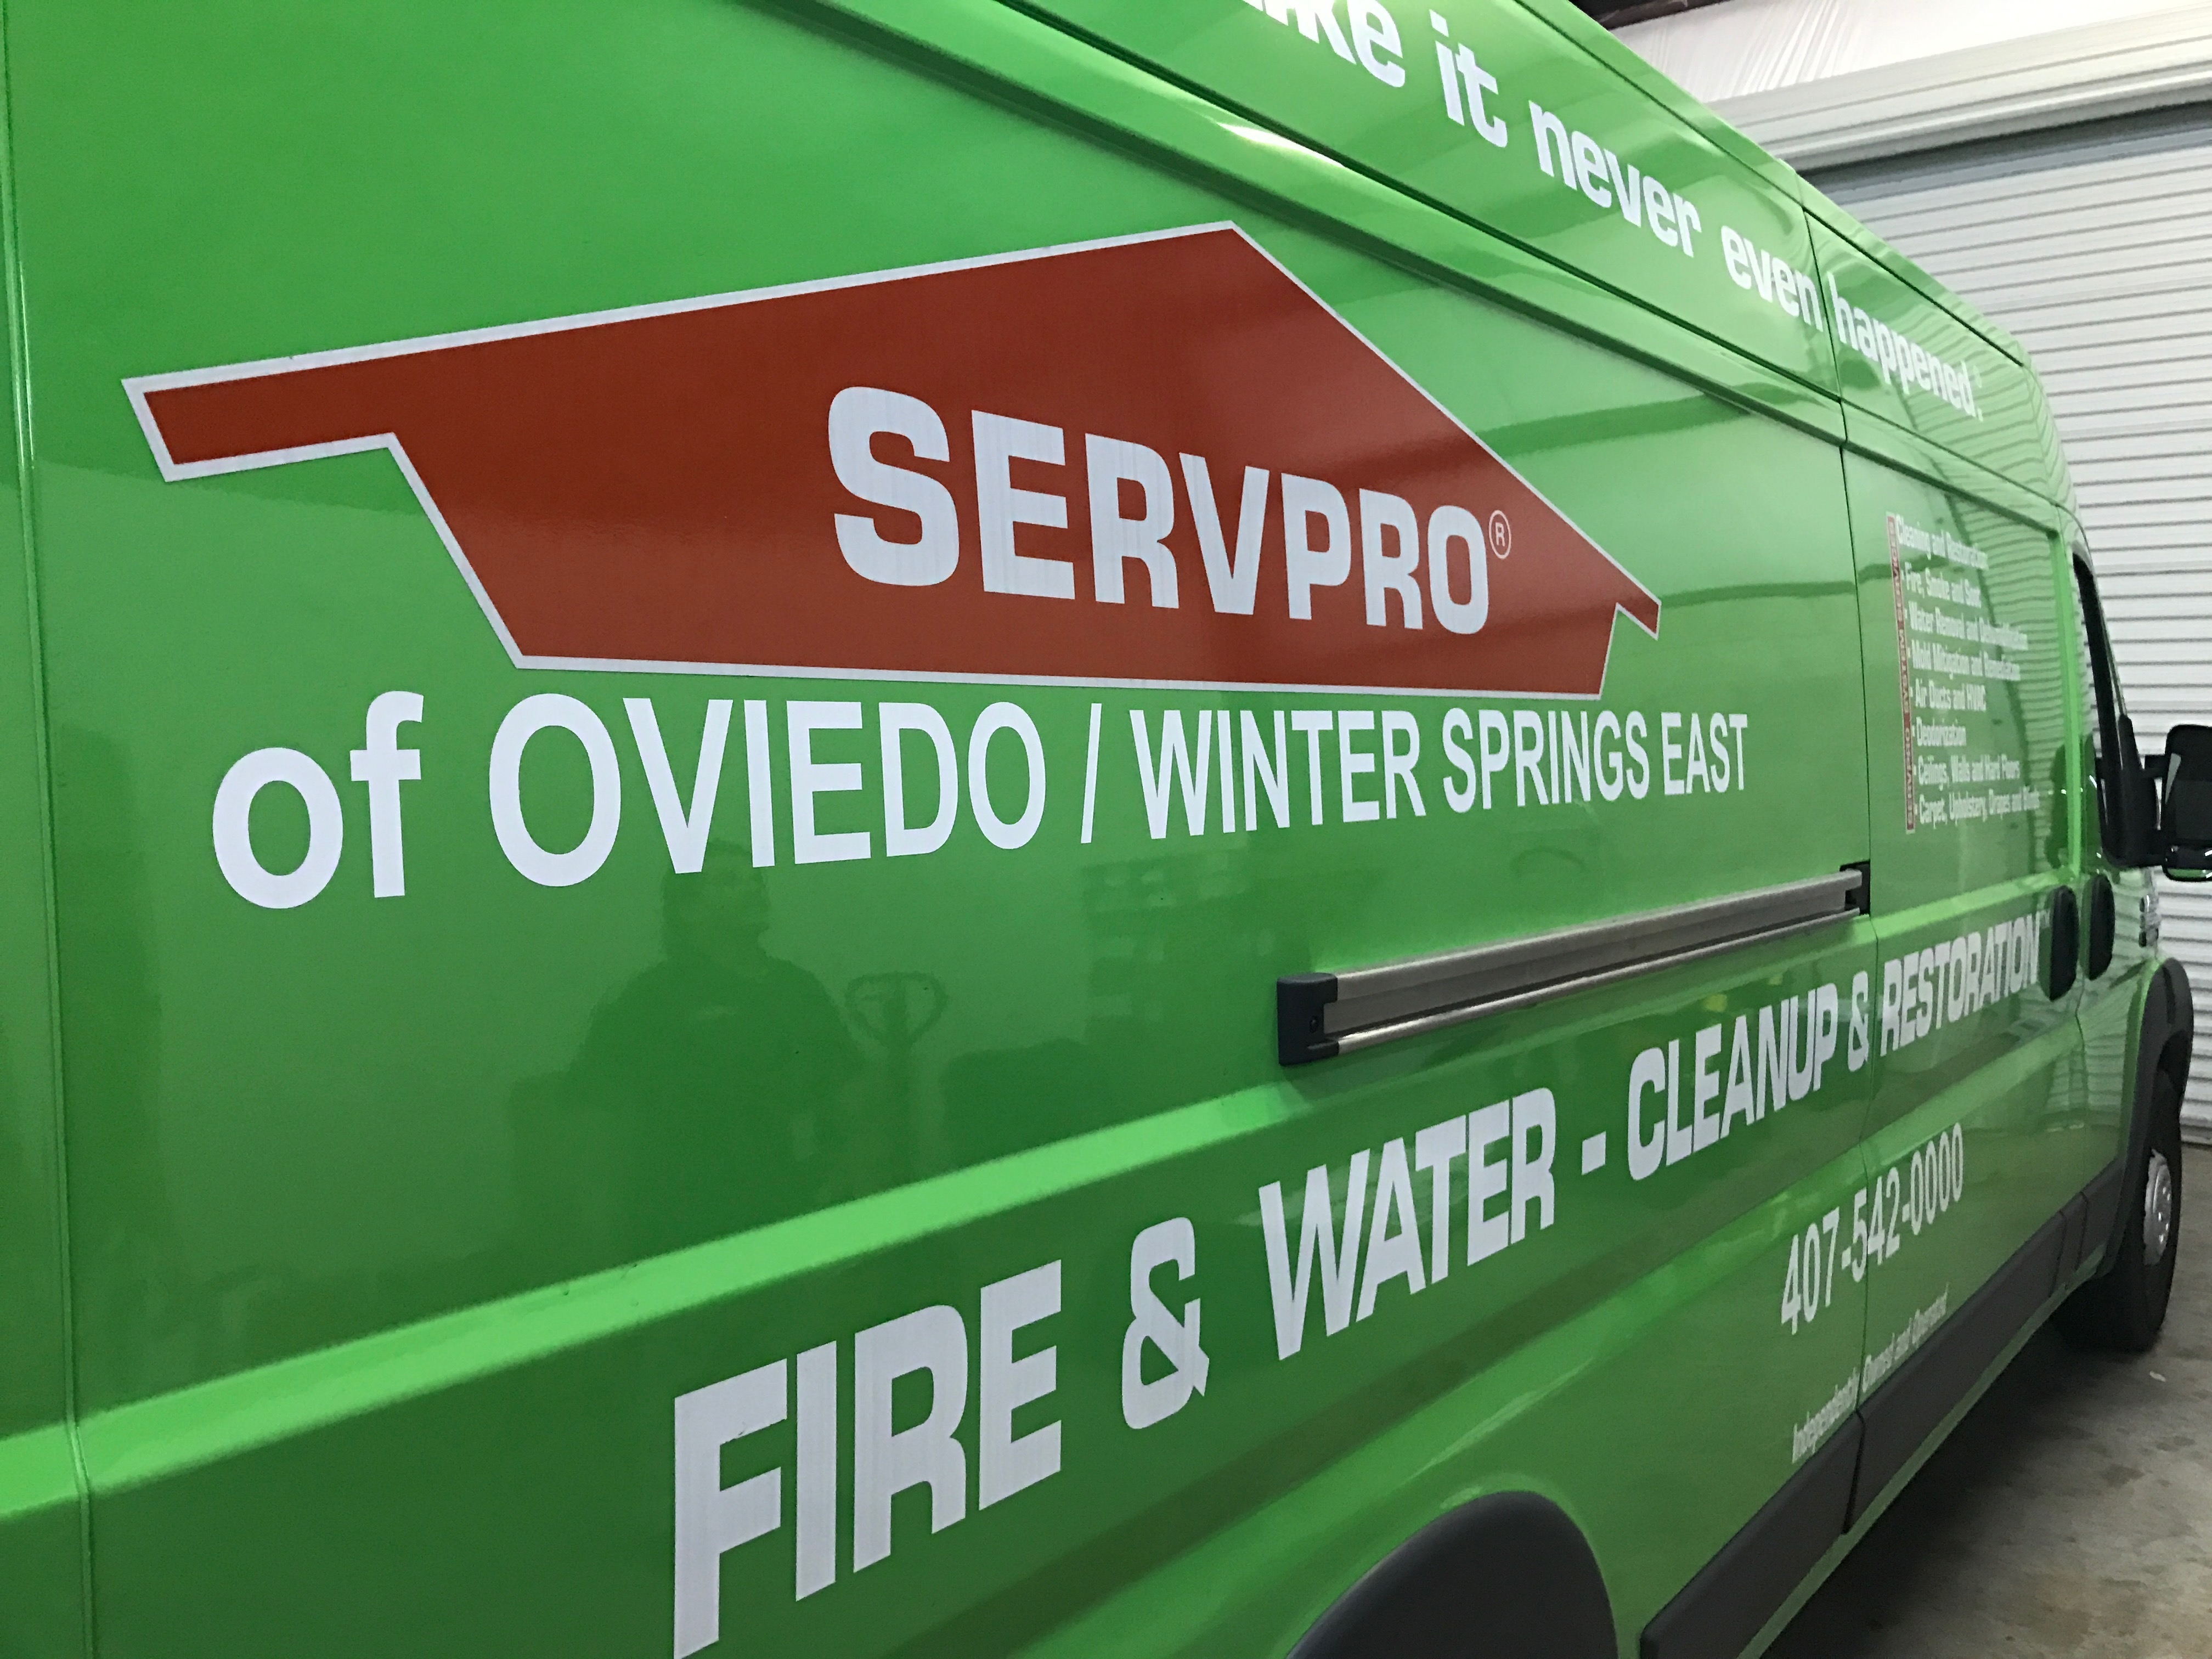 SERVPRO of Oviedo/ Winter Springs East is Ready for whatever happens!